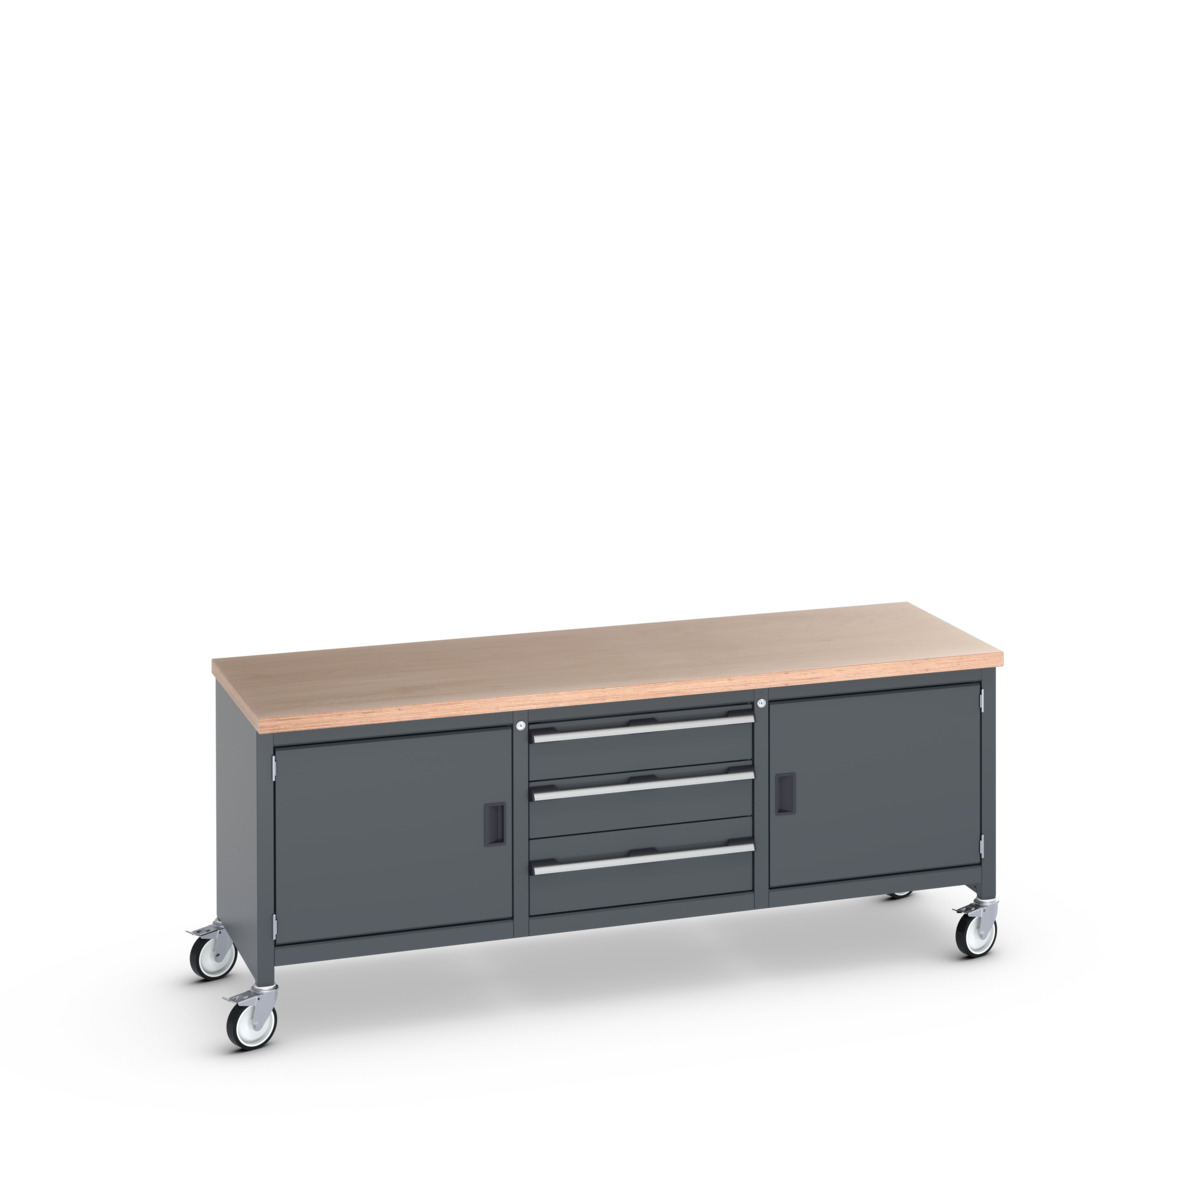 41002124.77V - cubio mobile storage bench (mpx)